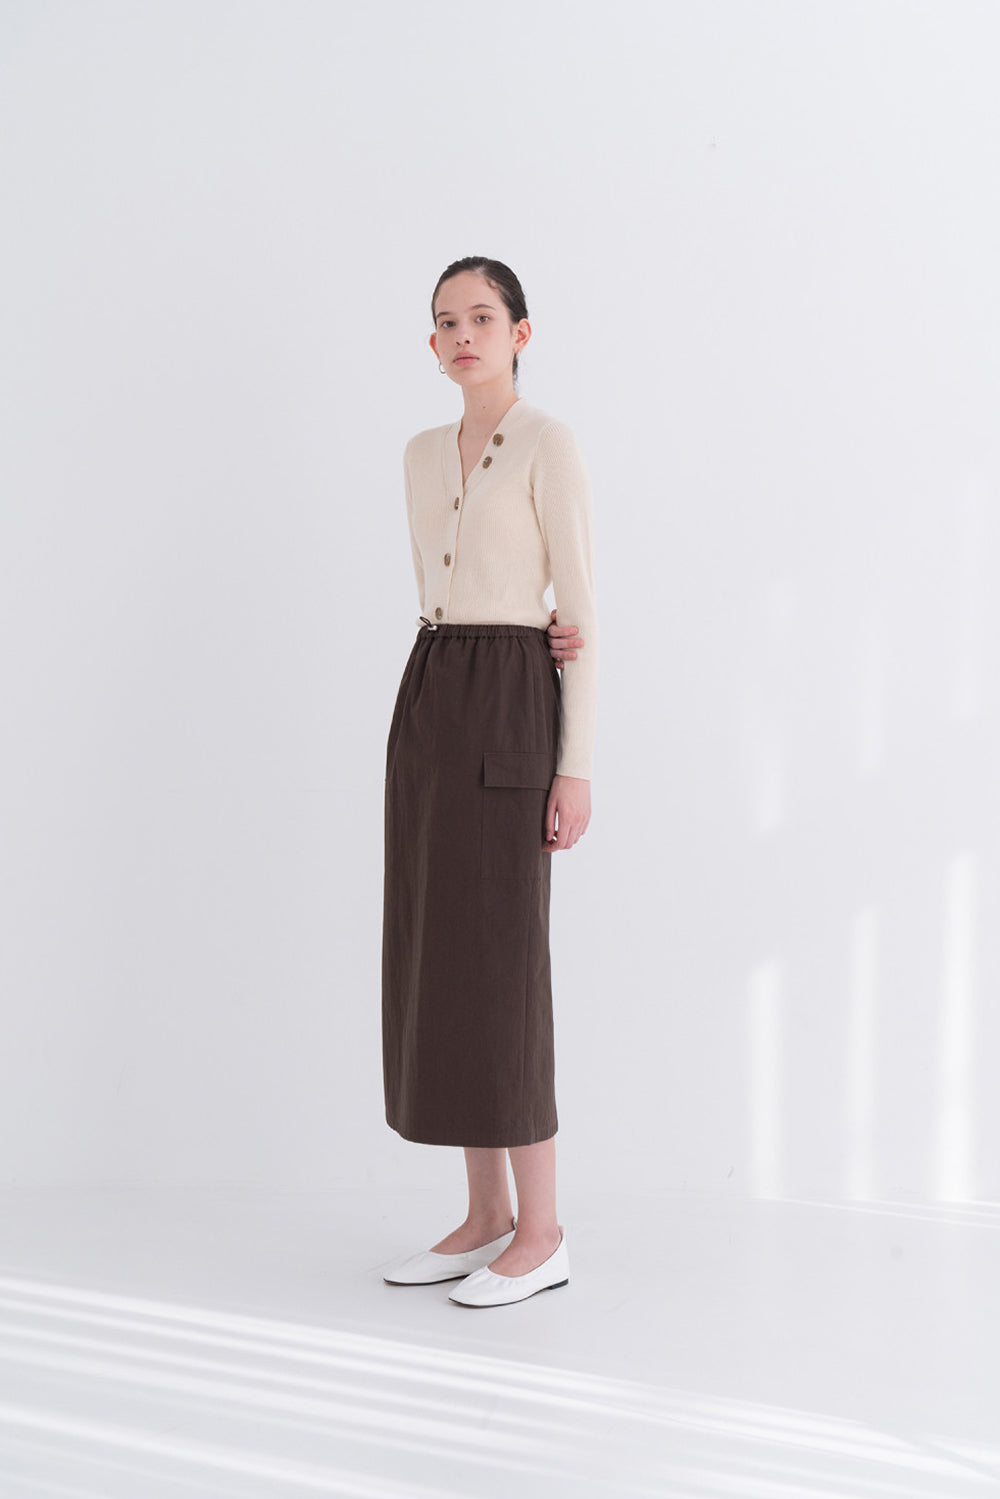 NOTA Twin Pocket String Skirt Brown Modest Below-The-Knee Length Skirt With Elastic Waistband and Side Pockets in Cotton and Nylon